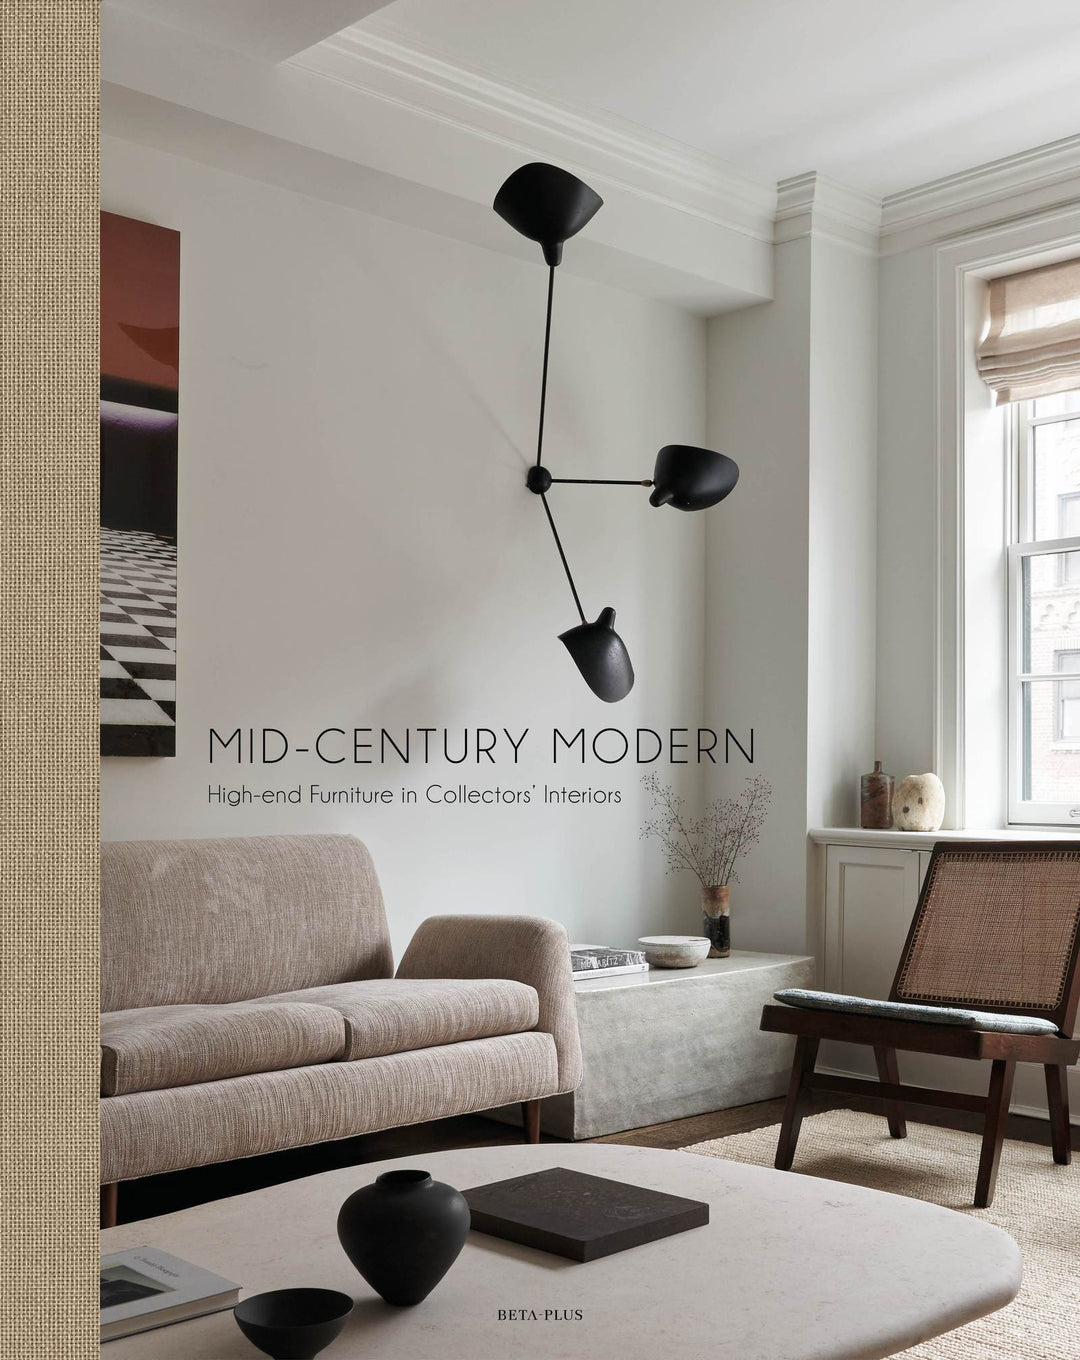 Livre Mid-Century Modern - High-End Furniture in Collector's Interiors